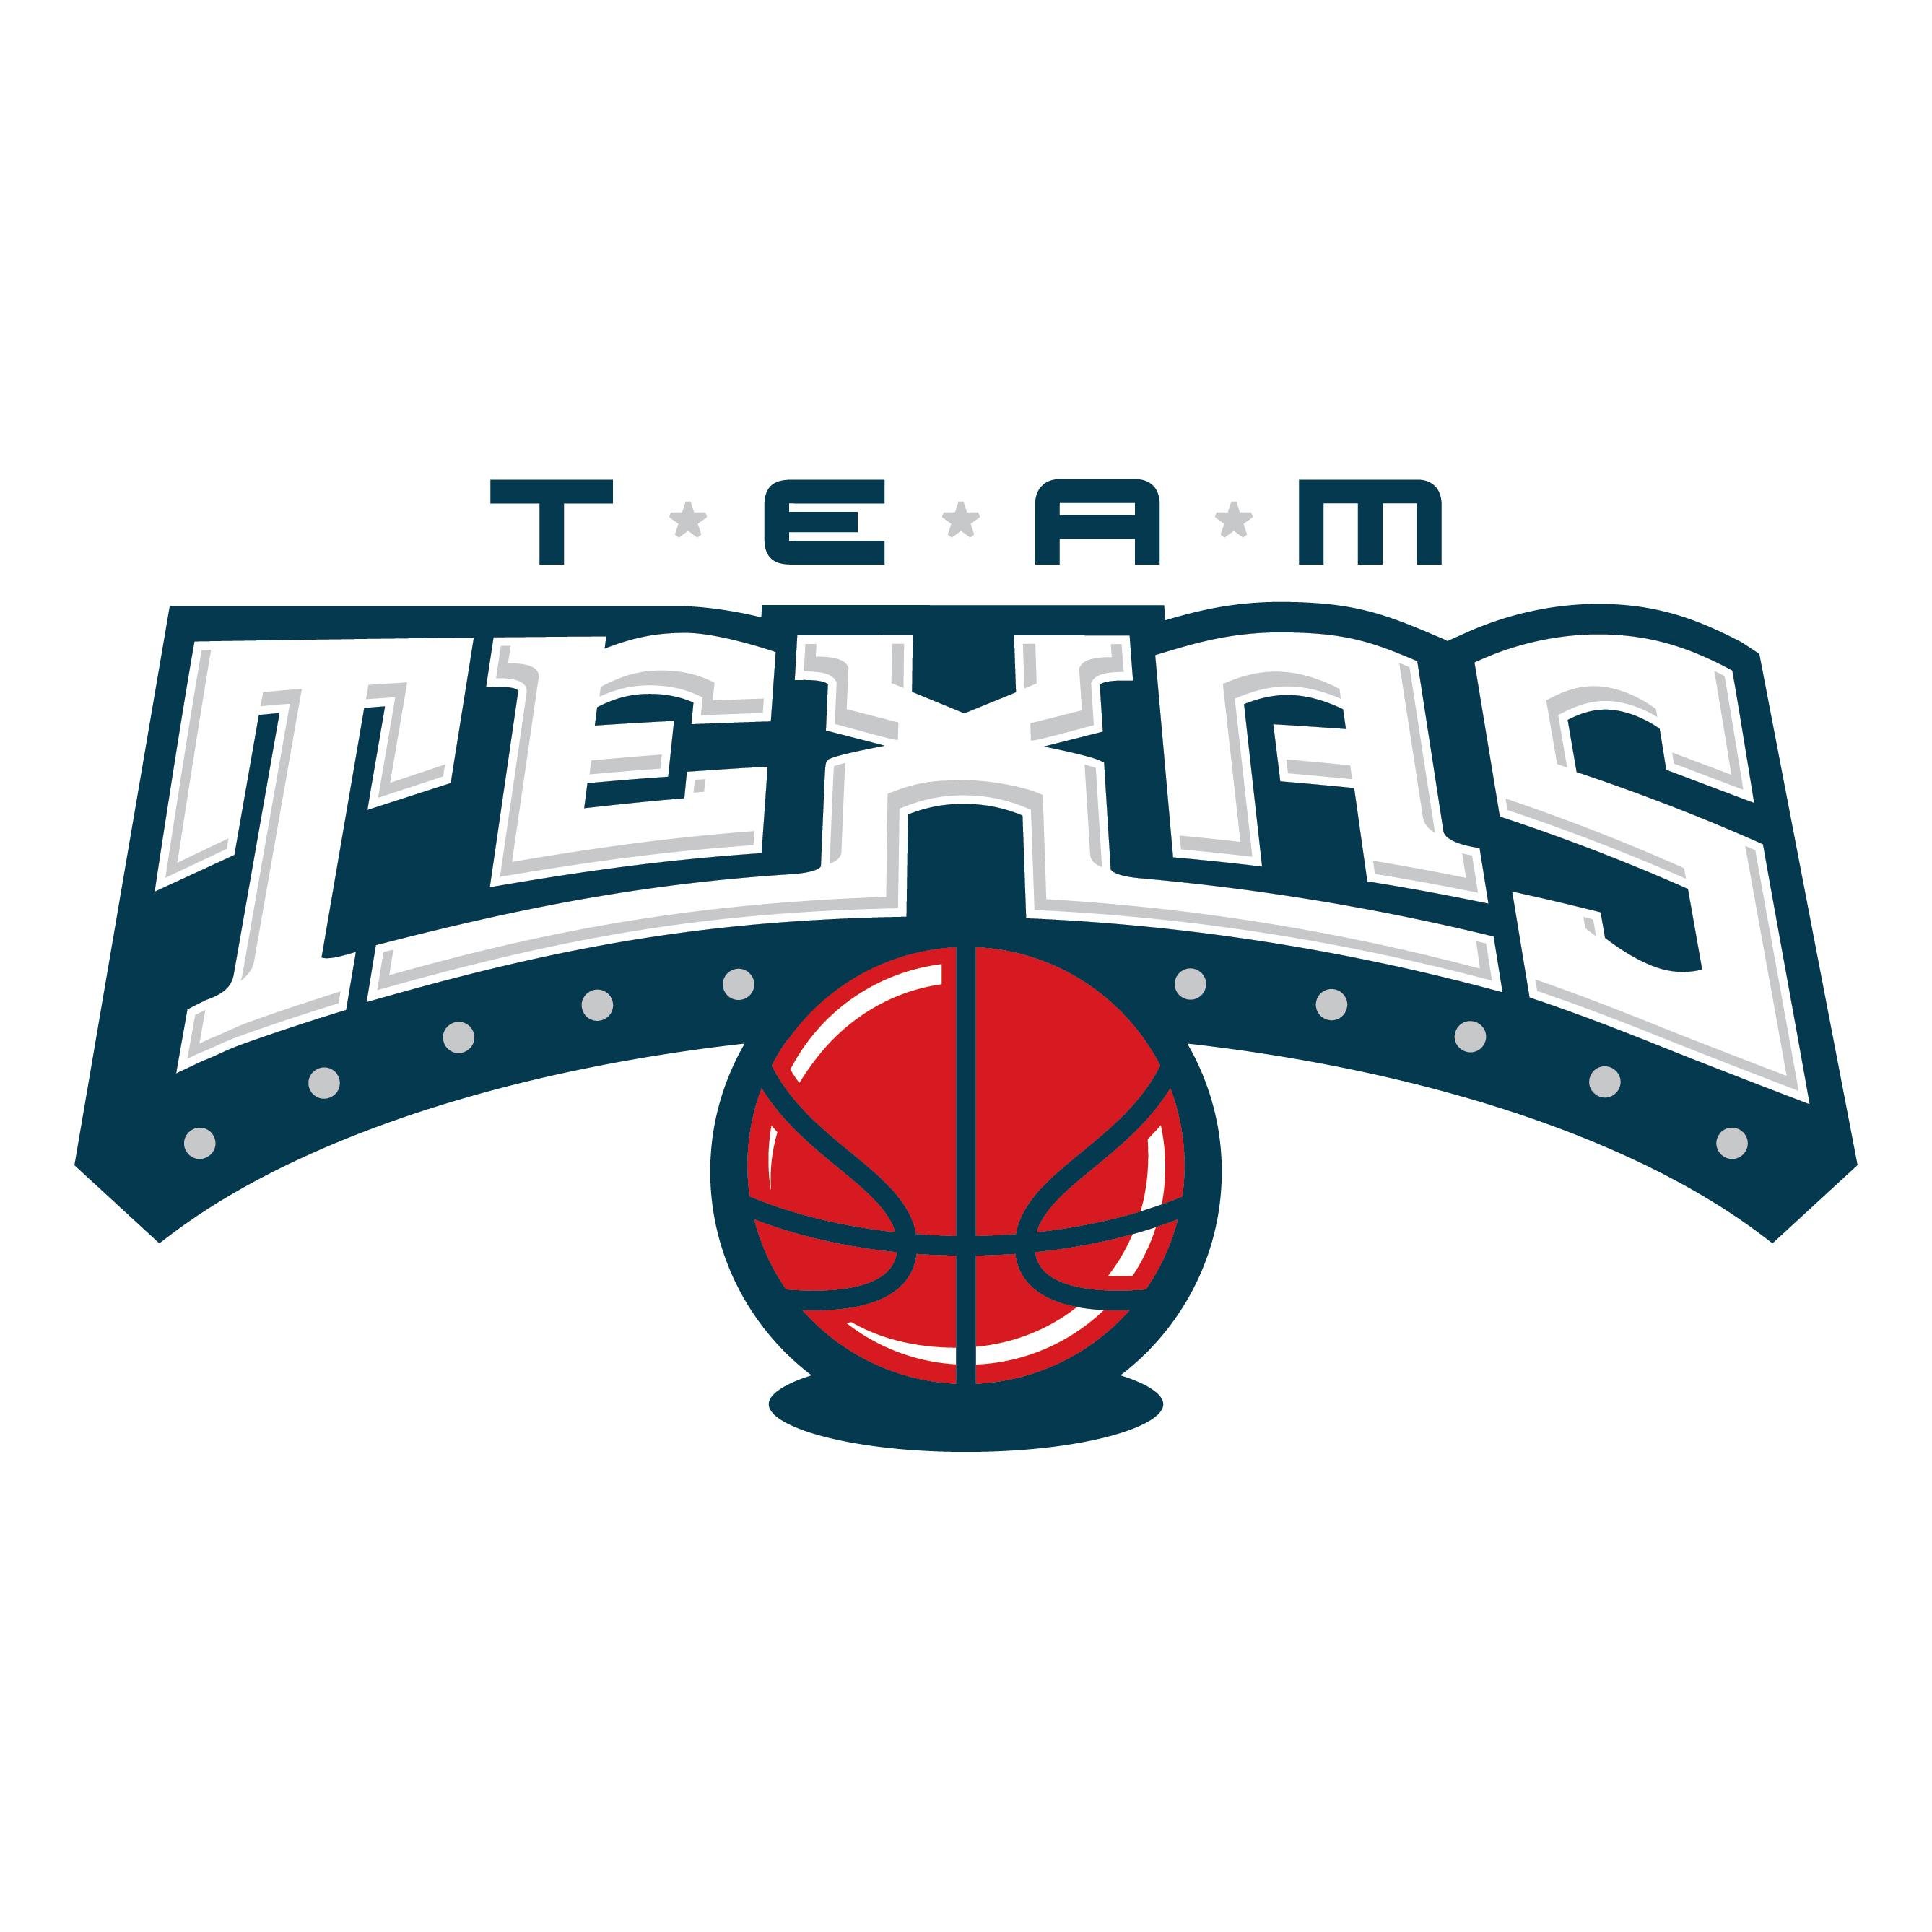 Team Texas is a nationally recognized Nike basketball program based in Dallas.